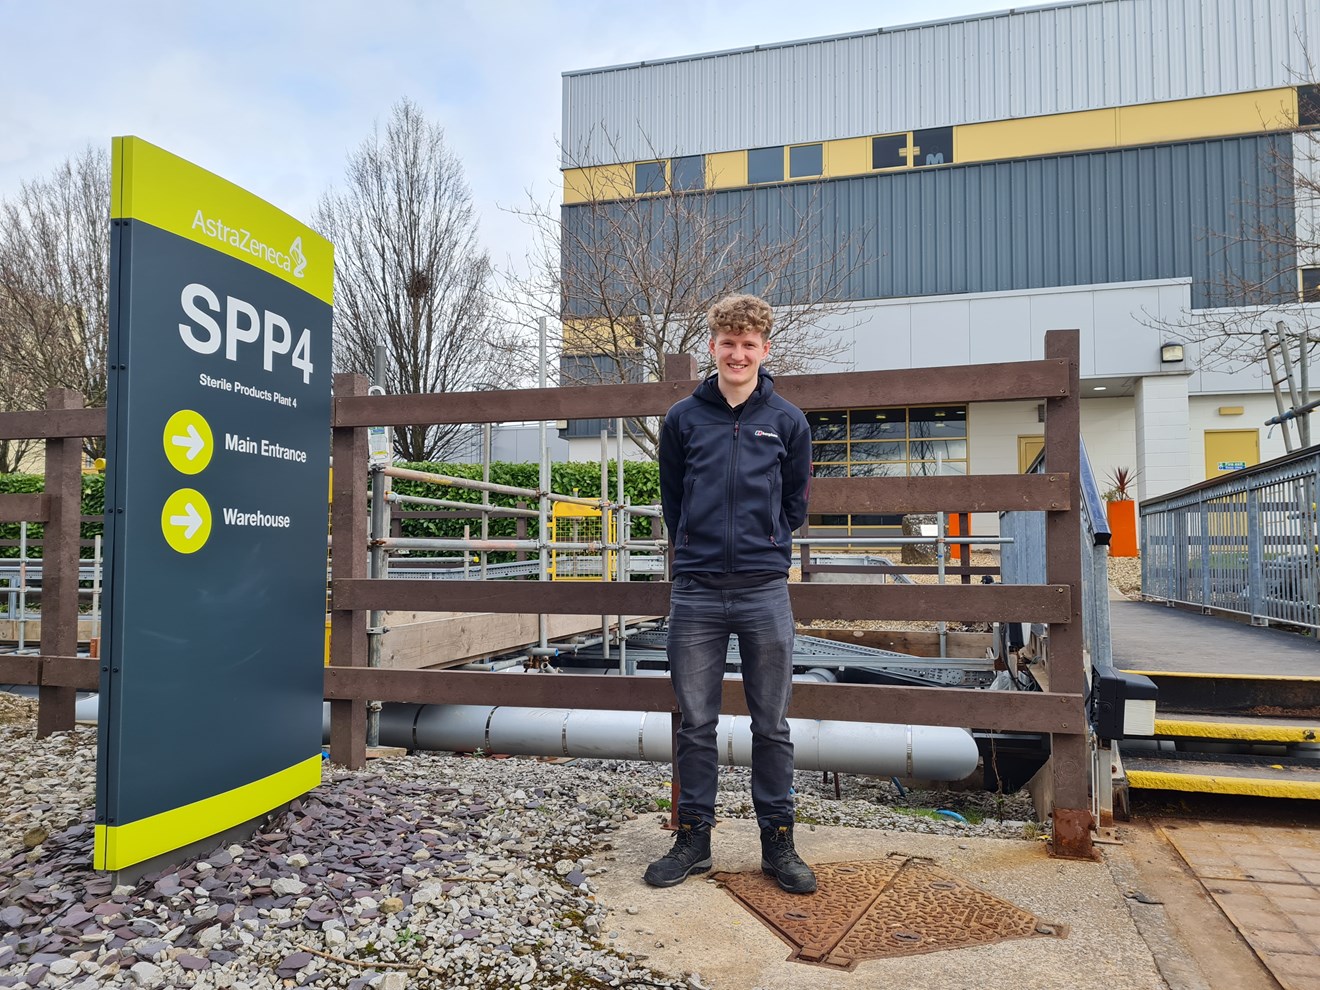 Siemens’ pioneering degree apprenticeship programme supercharges 60 engineering careers: Rob Rowson is working at AstraZeneca in Macclesfield while studying through Siemens Digital Industries' degree apprenticeship programme (3)